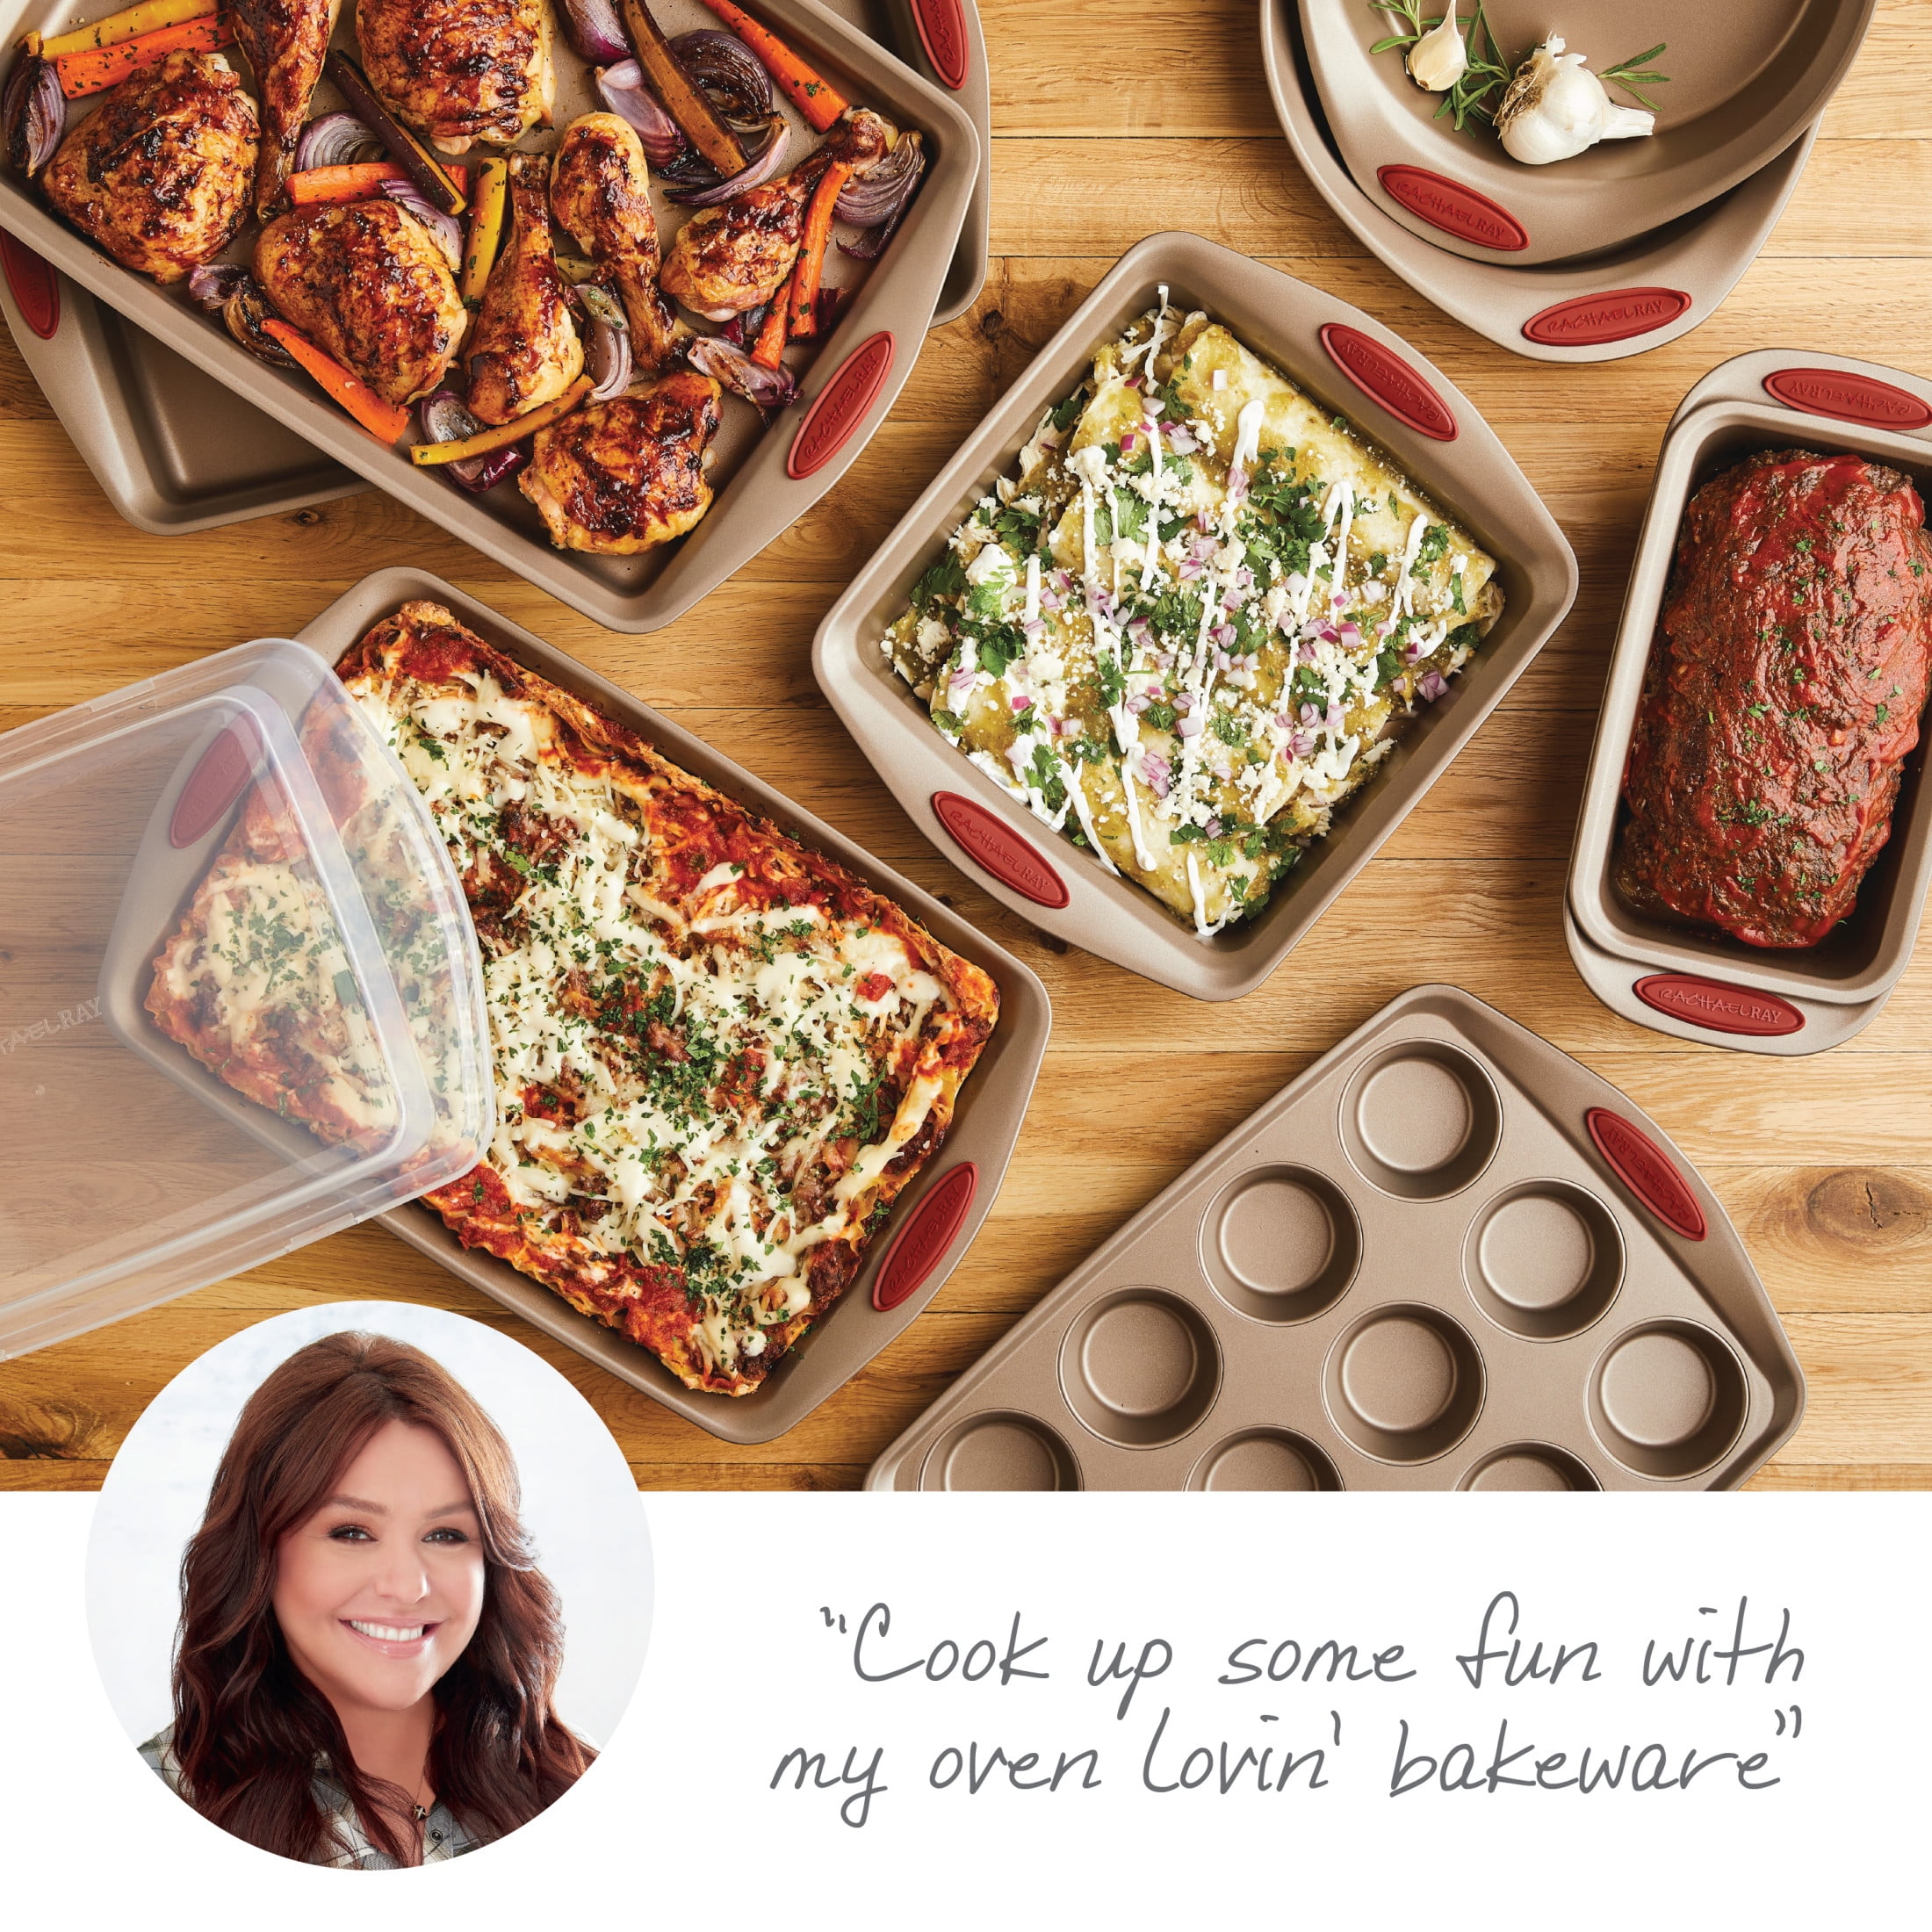 Rachael Ray 52410 Cucina Nonstick Bakeware Set with Baking Pans, Baking  Sheets, Cookie Sheets, and Bread Pan - 10 Piece & Pyrex Glass Measuring Cup